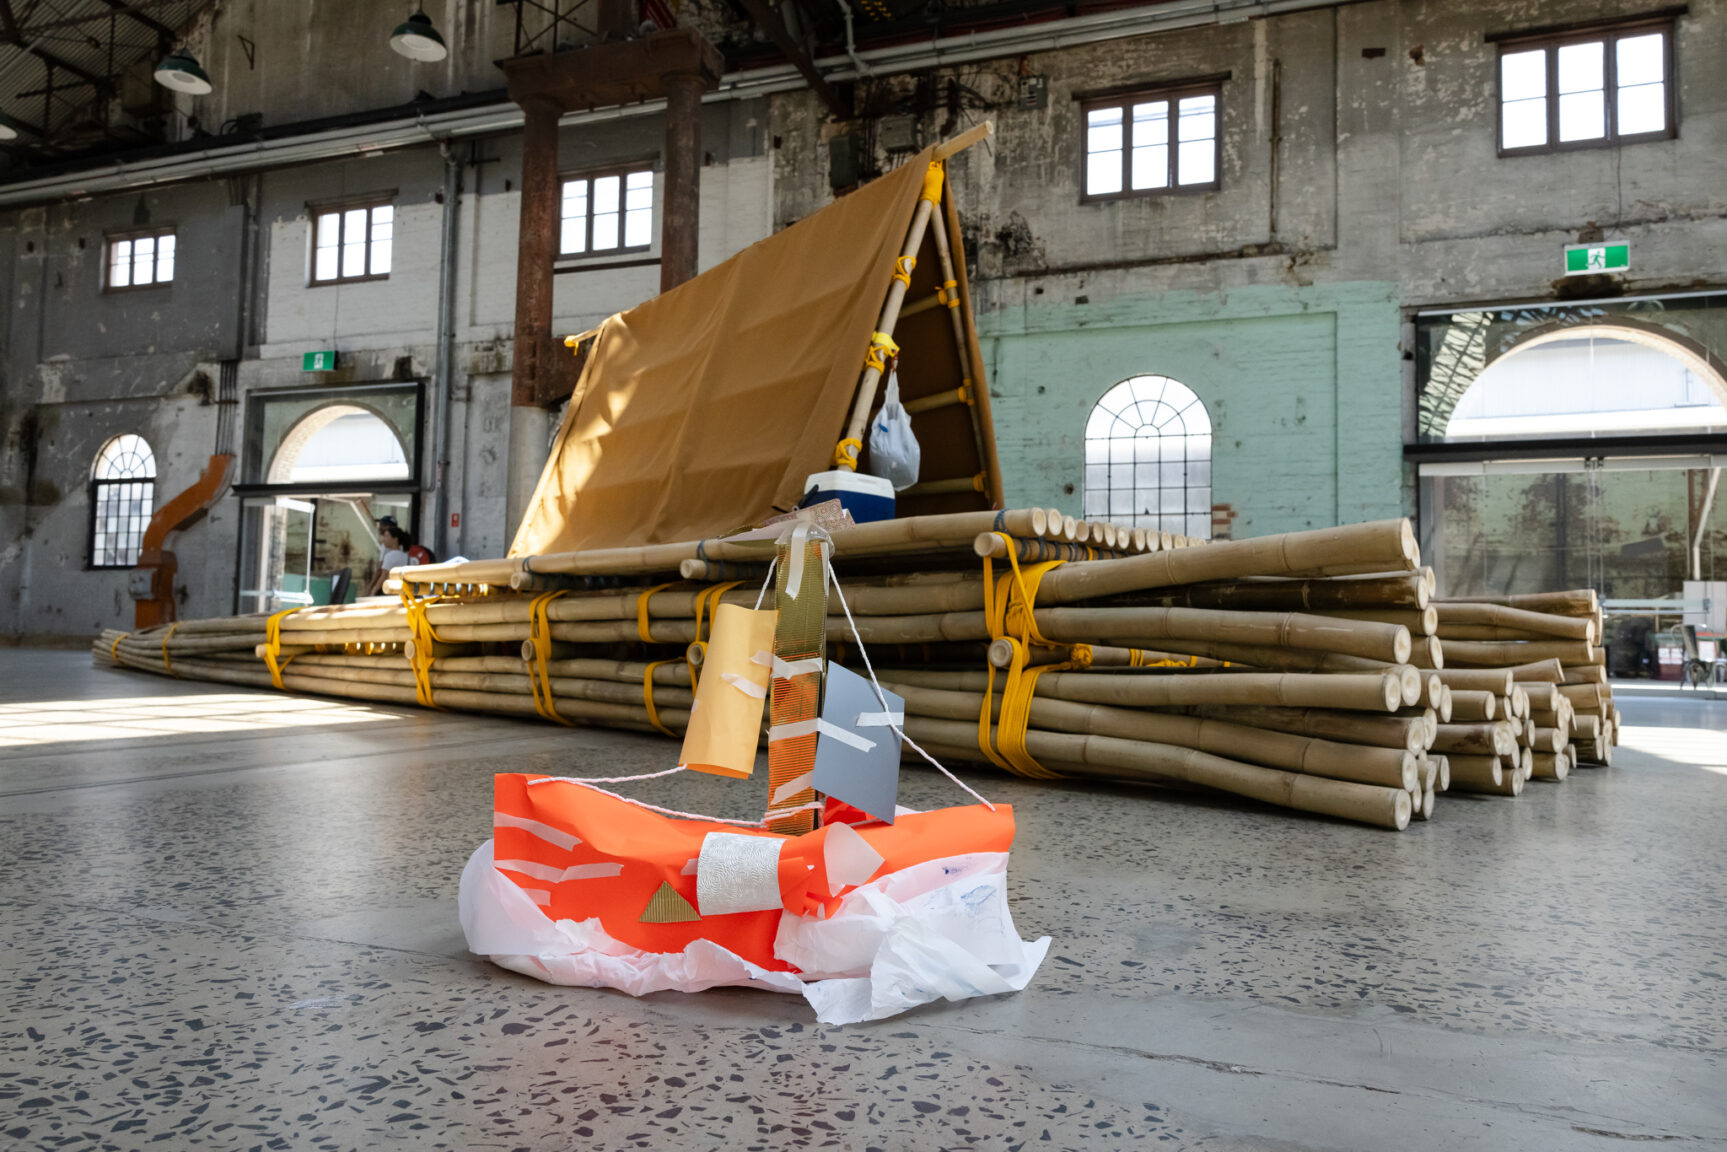 a bamboo raft inside the Public Space of Carriageworks behind crafted cardboard recreation sitting of the bamboo